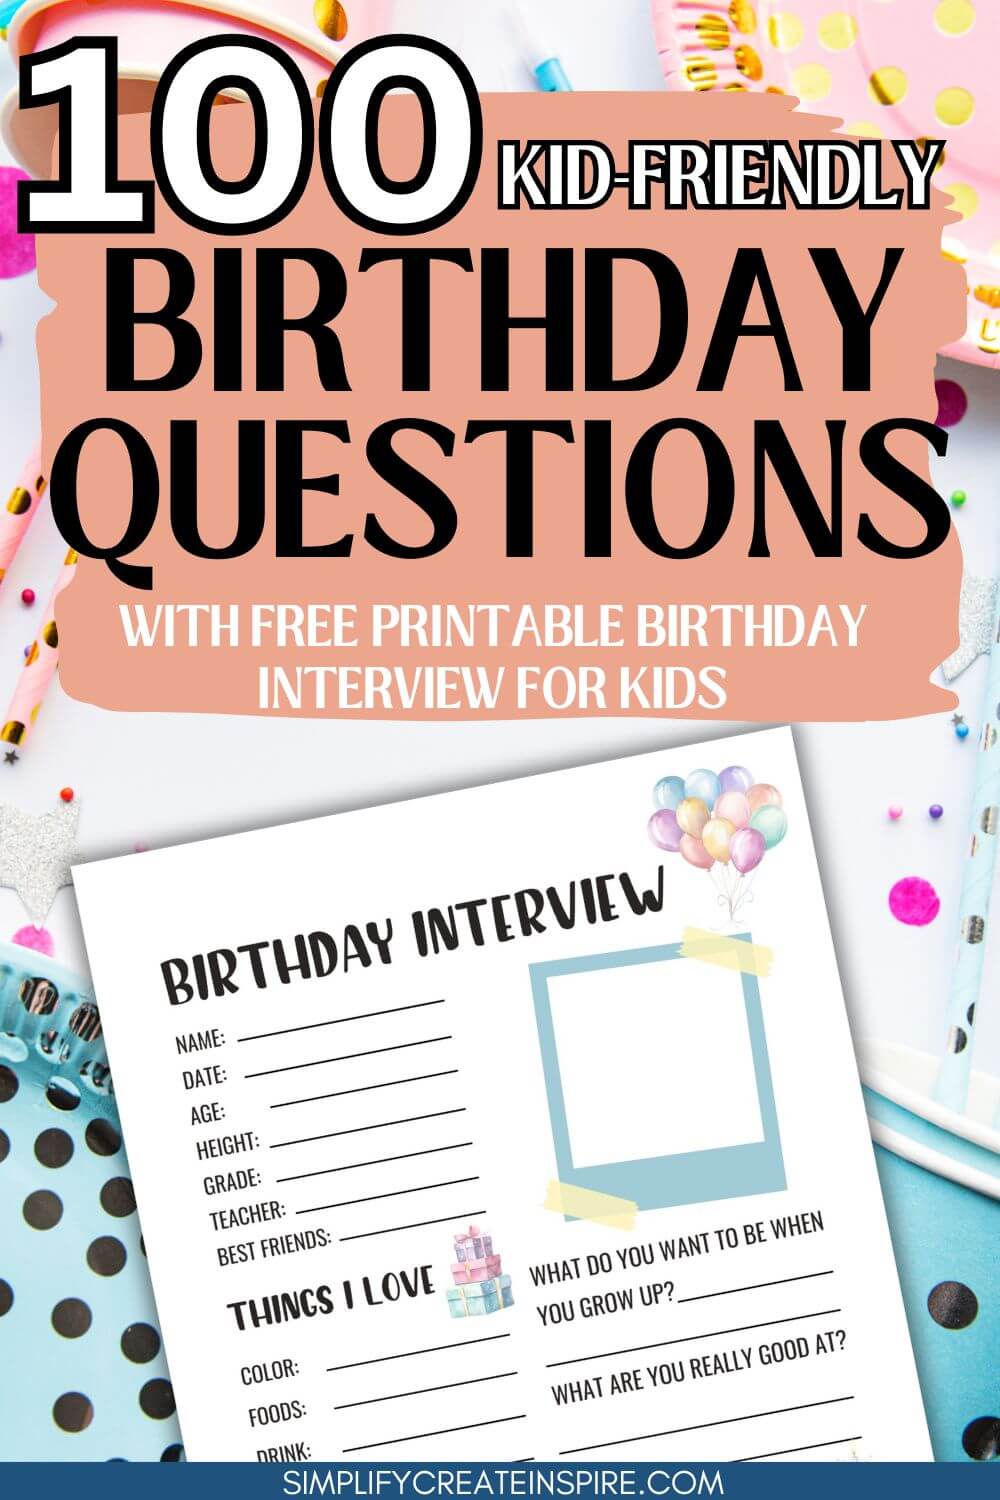 Pinterest image - 100 birthday questions for kids with free printable birthday interview.